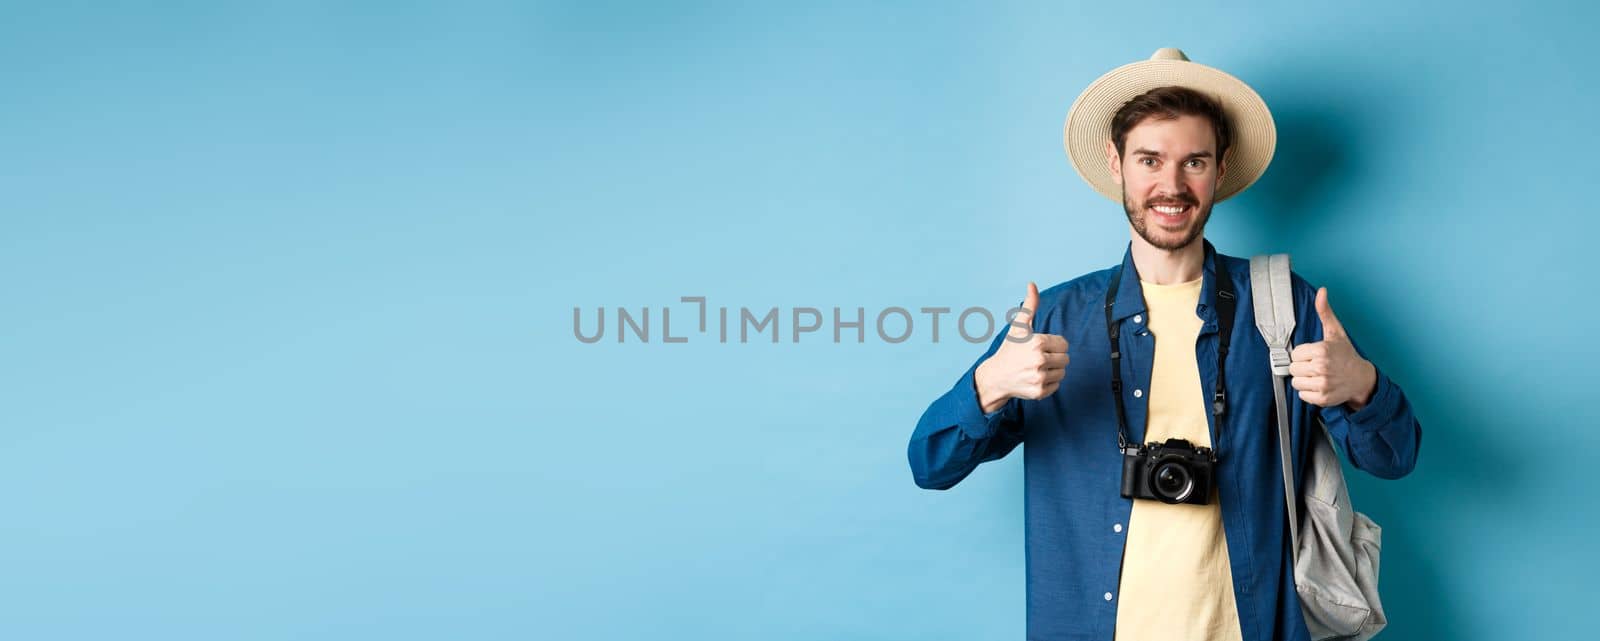 Cheerful handsome man recommending summer vacation place, showing thumbs up and smiling in approval. Tourist leave positive feedback, standing with camera and backpack on blue background.